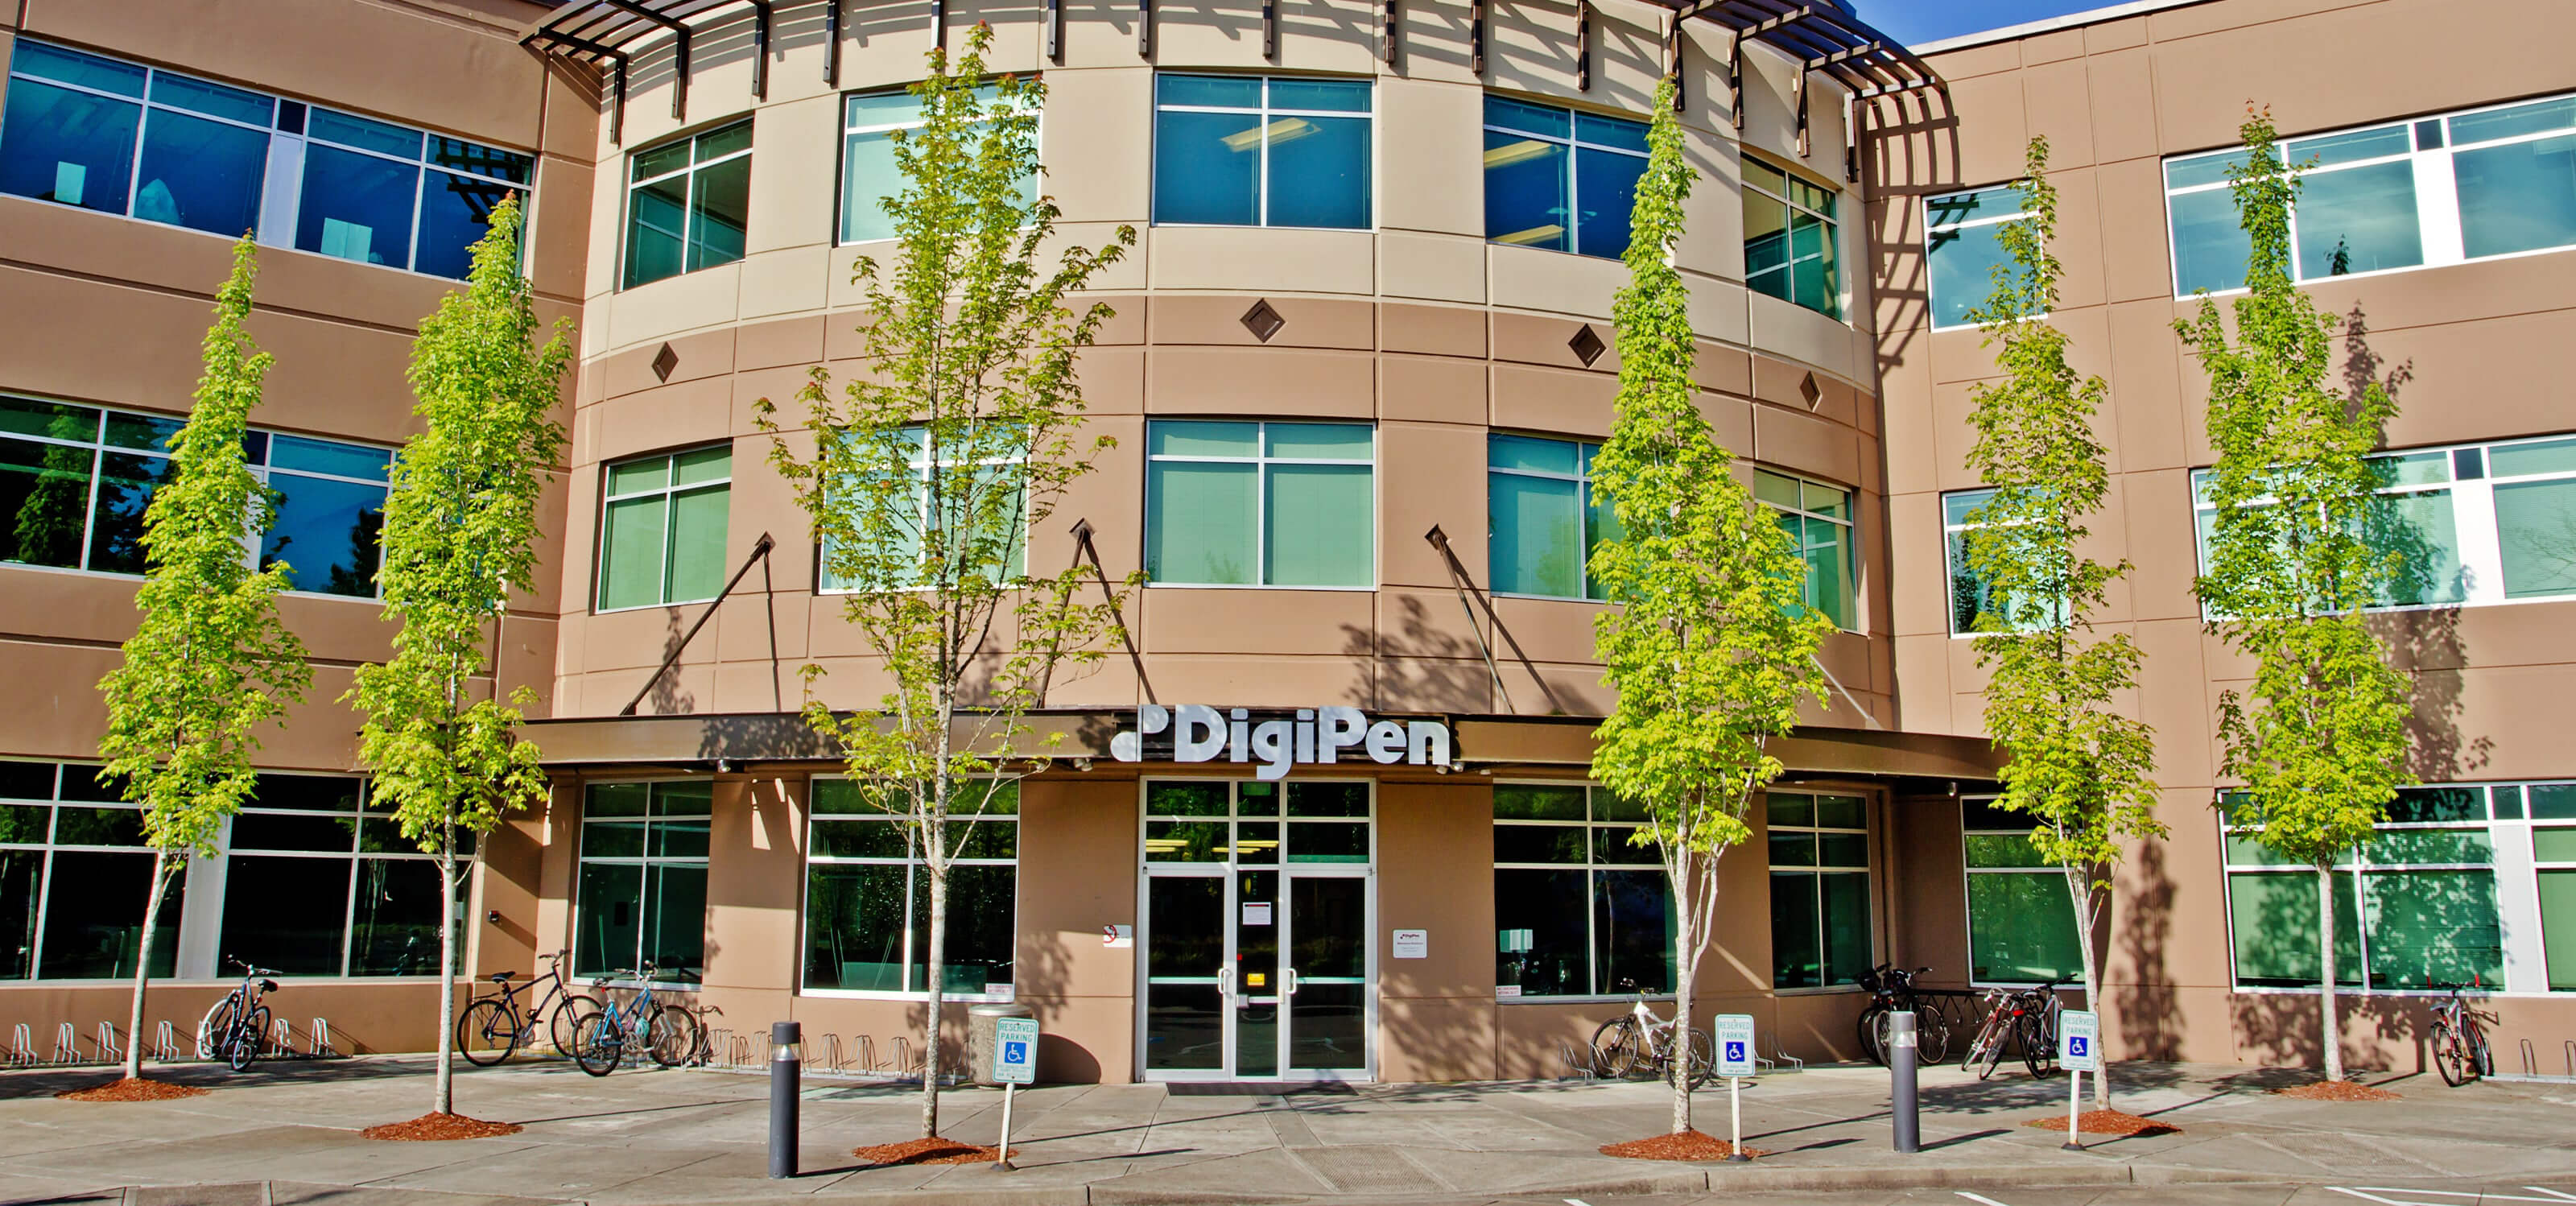 Picture of the DigiPen front entrance on a sunny day